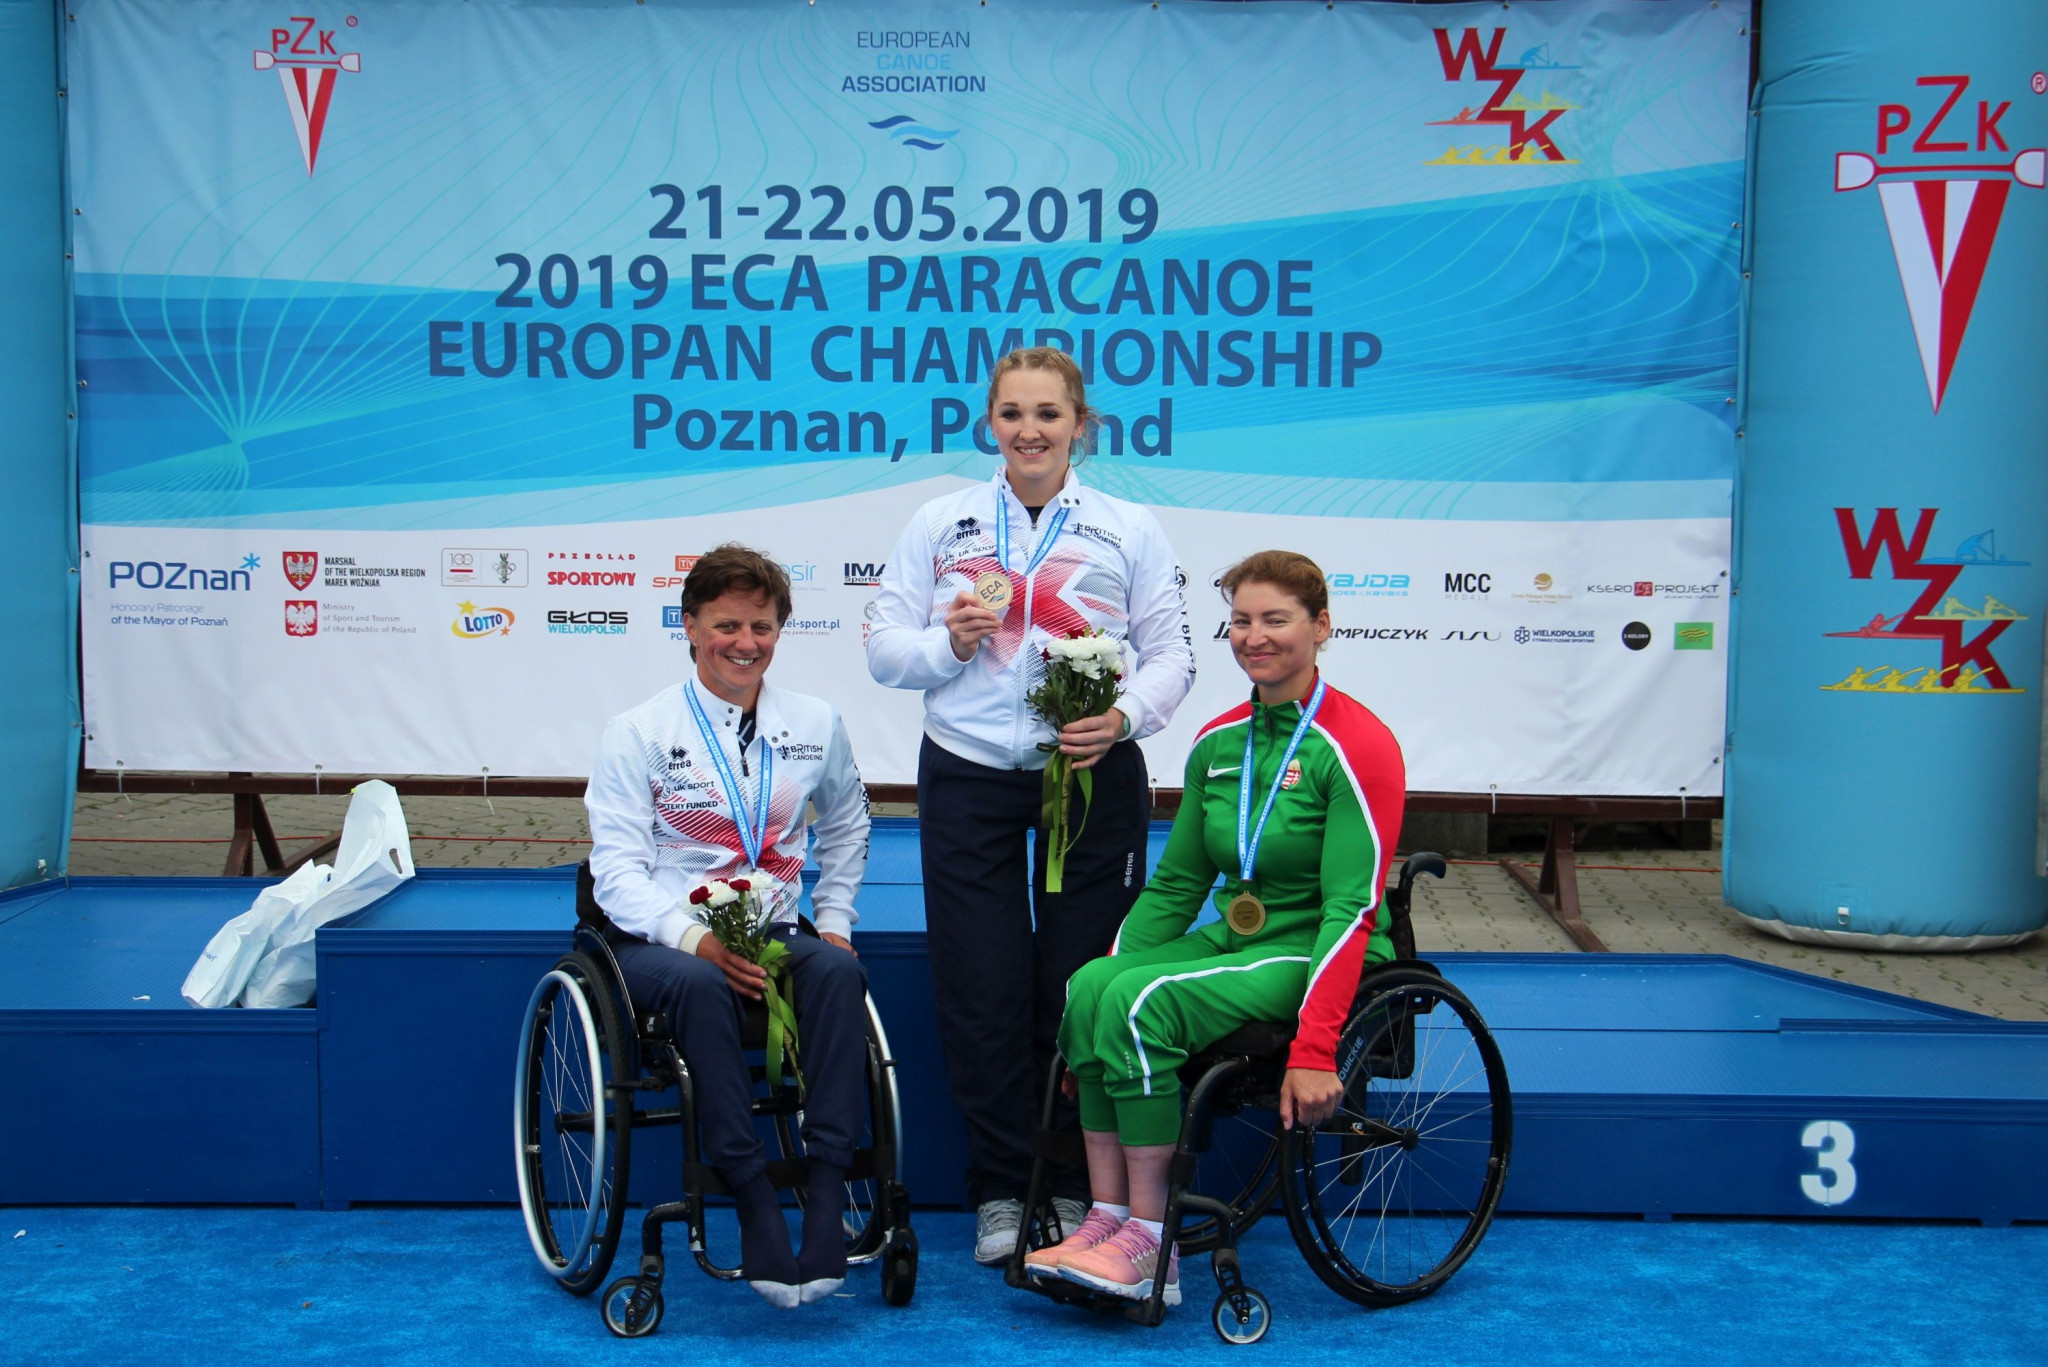 Charlotte Henshaw was one of Great Britain's two gold medallists on the second and final day of the Paracanoe European Championships in Poznań ©ECA